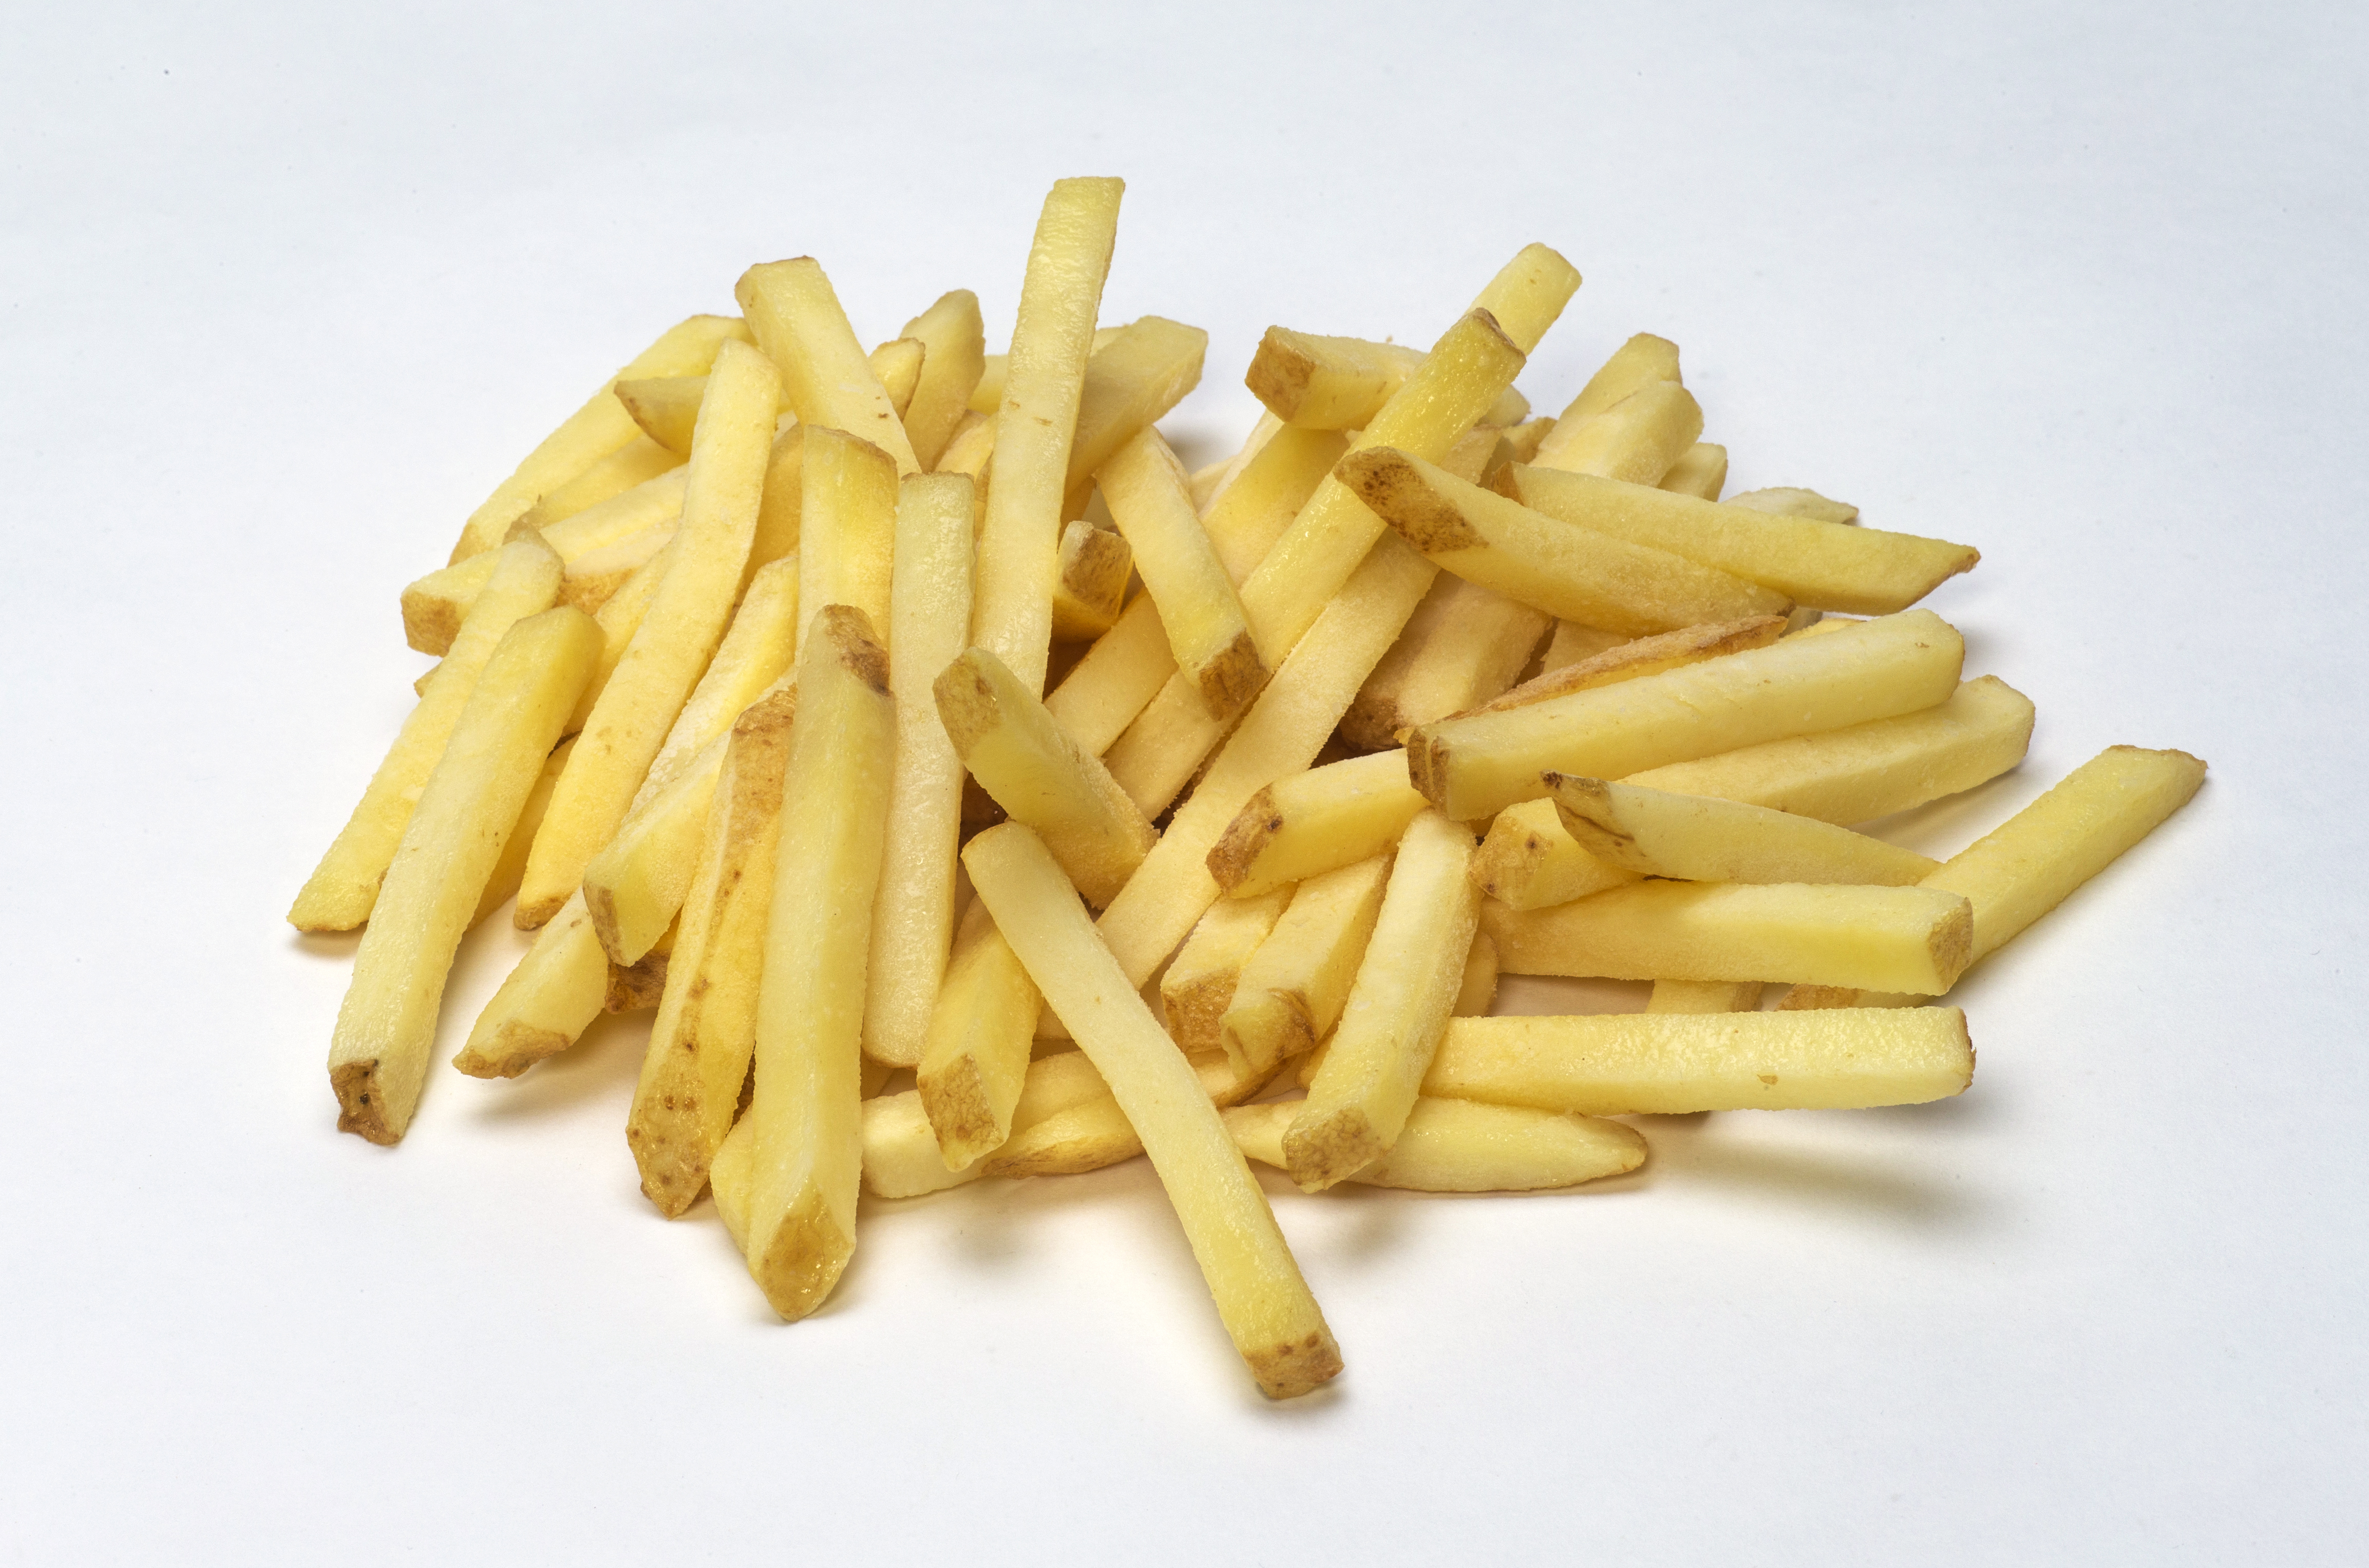 Chipperbec 3/8'' REMARKABLE Cut French Fries (Food Service) 12 units per case 2.5 lbs